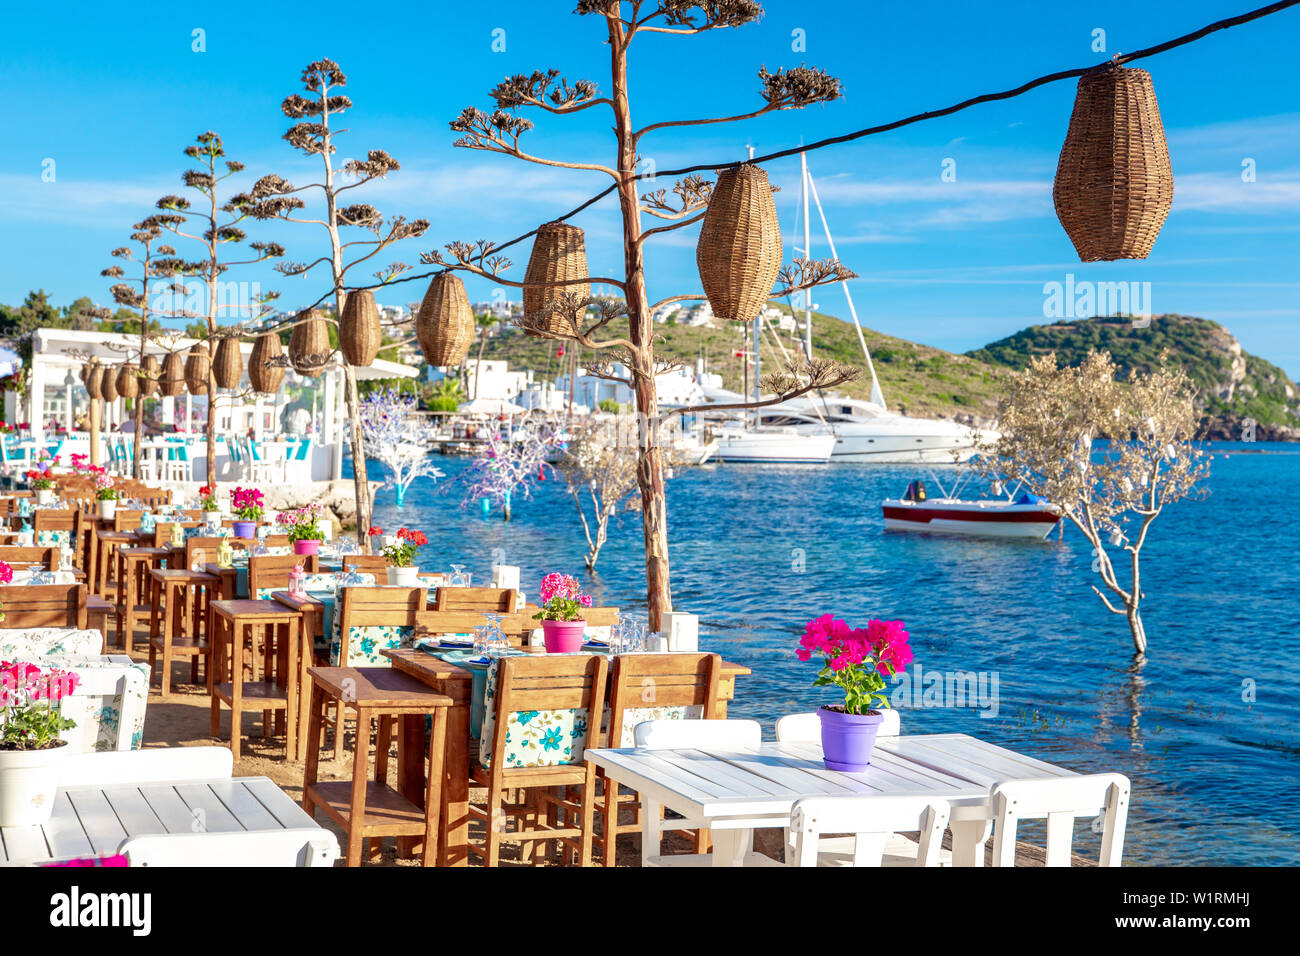 view of fish restaurant cafe and bougainvillea flowers on beach in gumusluk bodrum city of turkey aegean seaside style colorful chairs and tables stock photo alamy